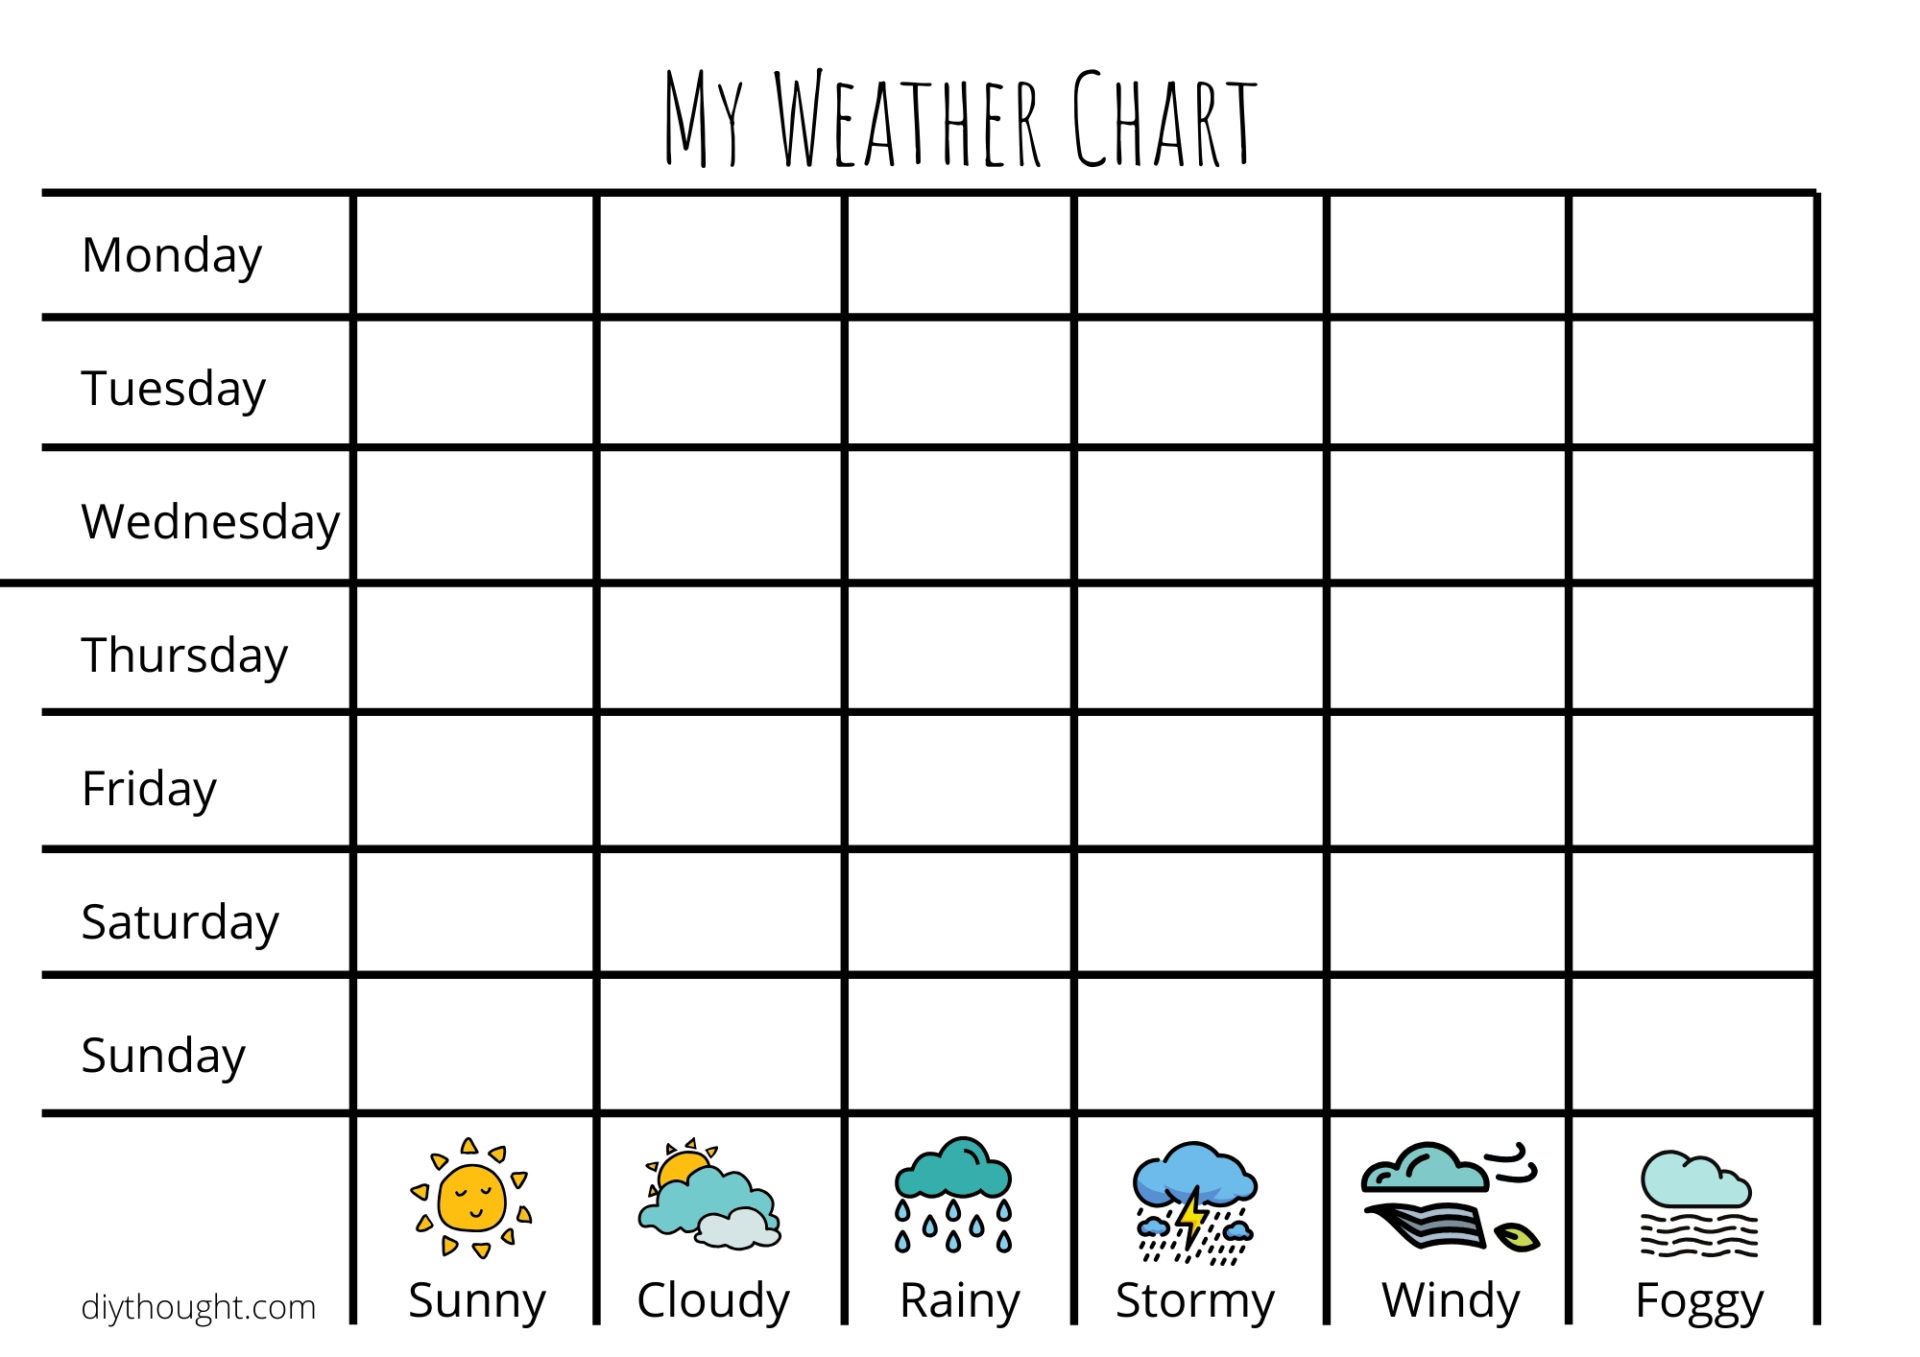 my-weather-chart-diy-thought